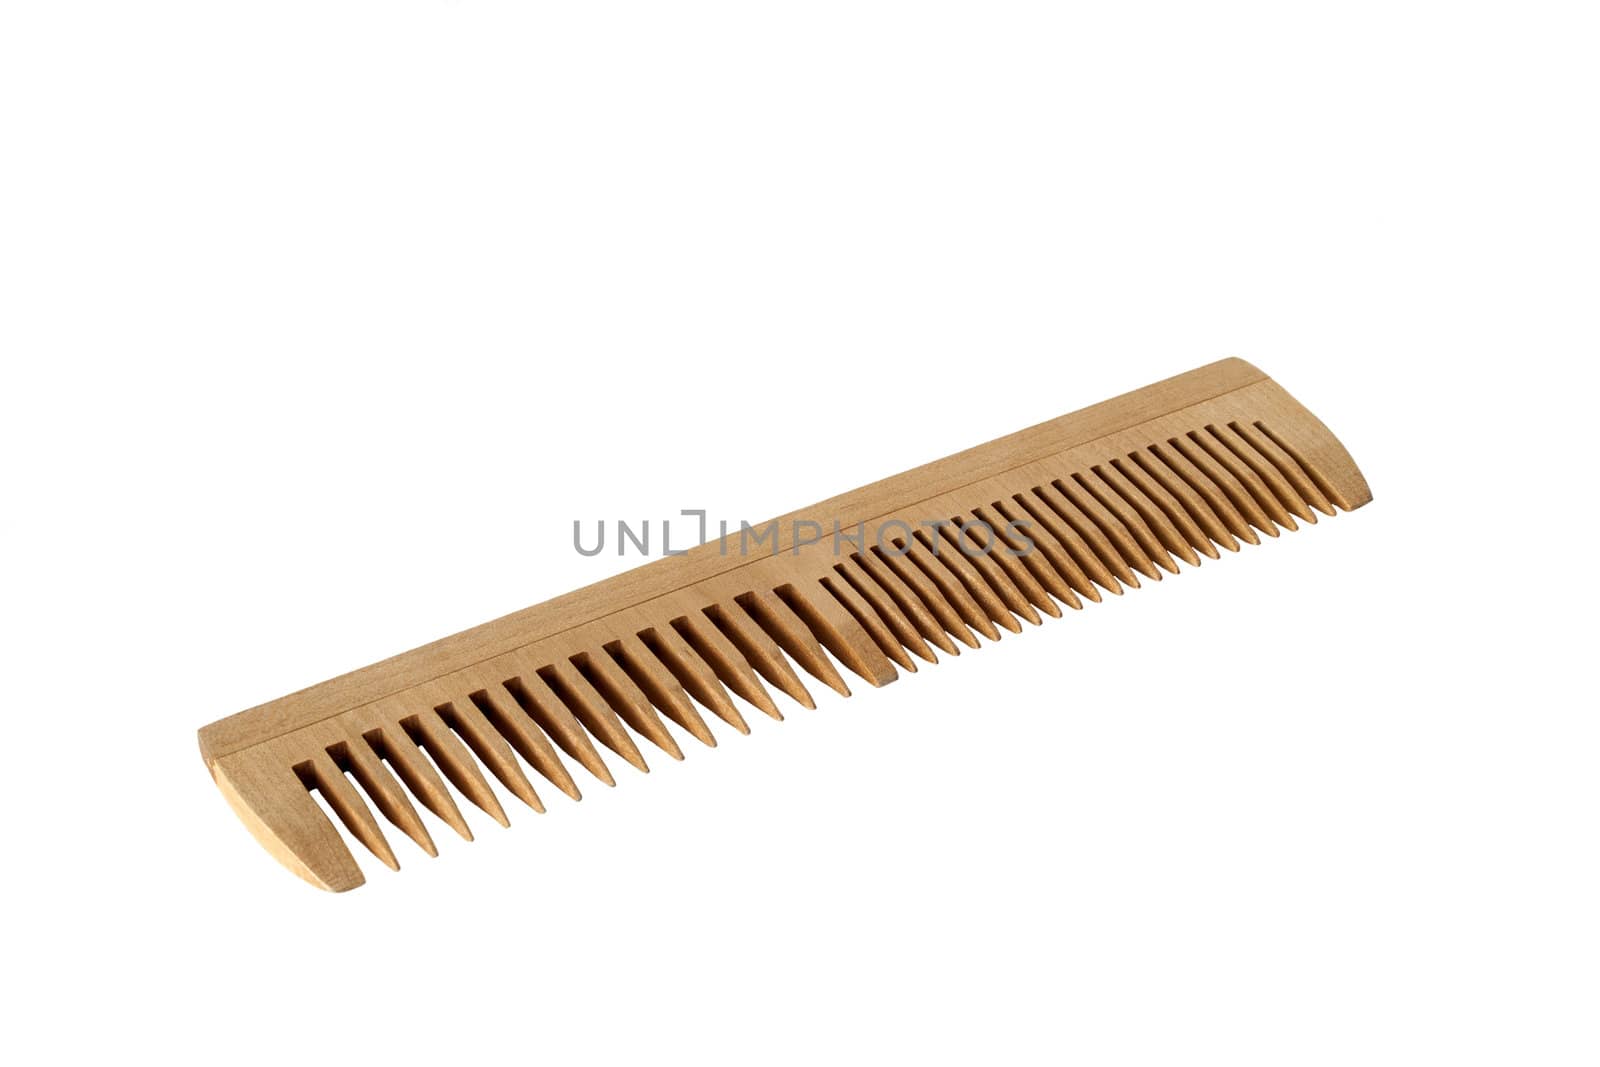 Wooden women comb in isolated over white background